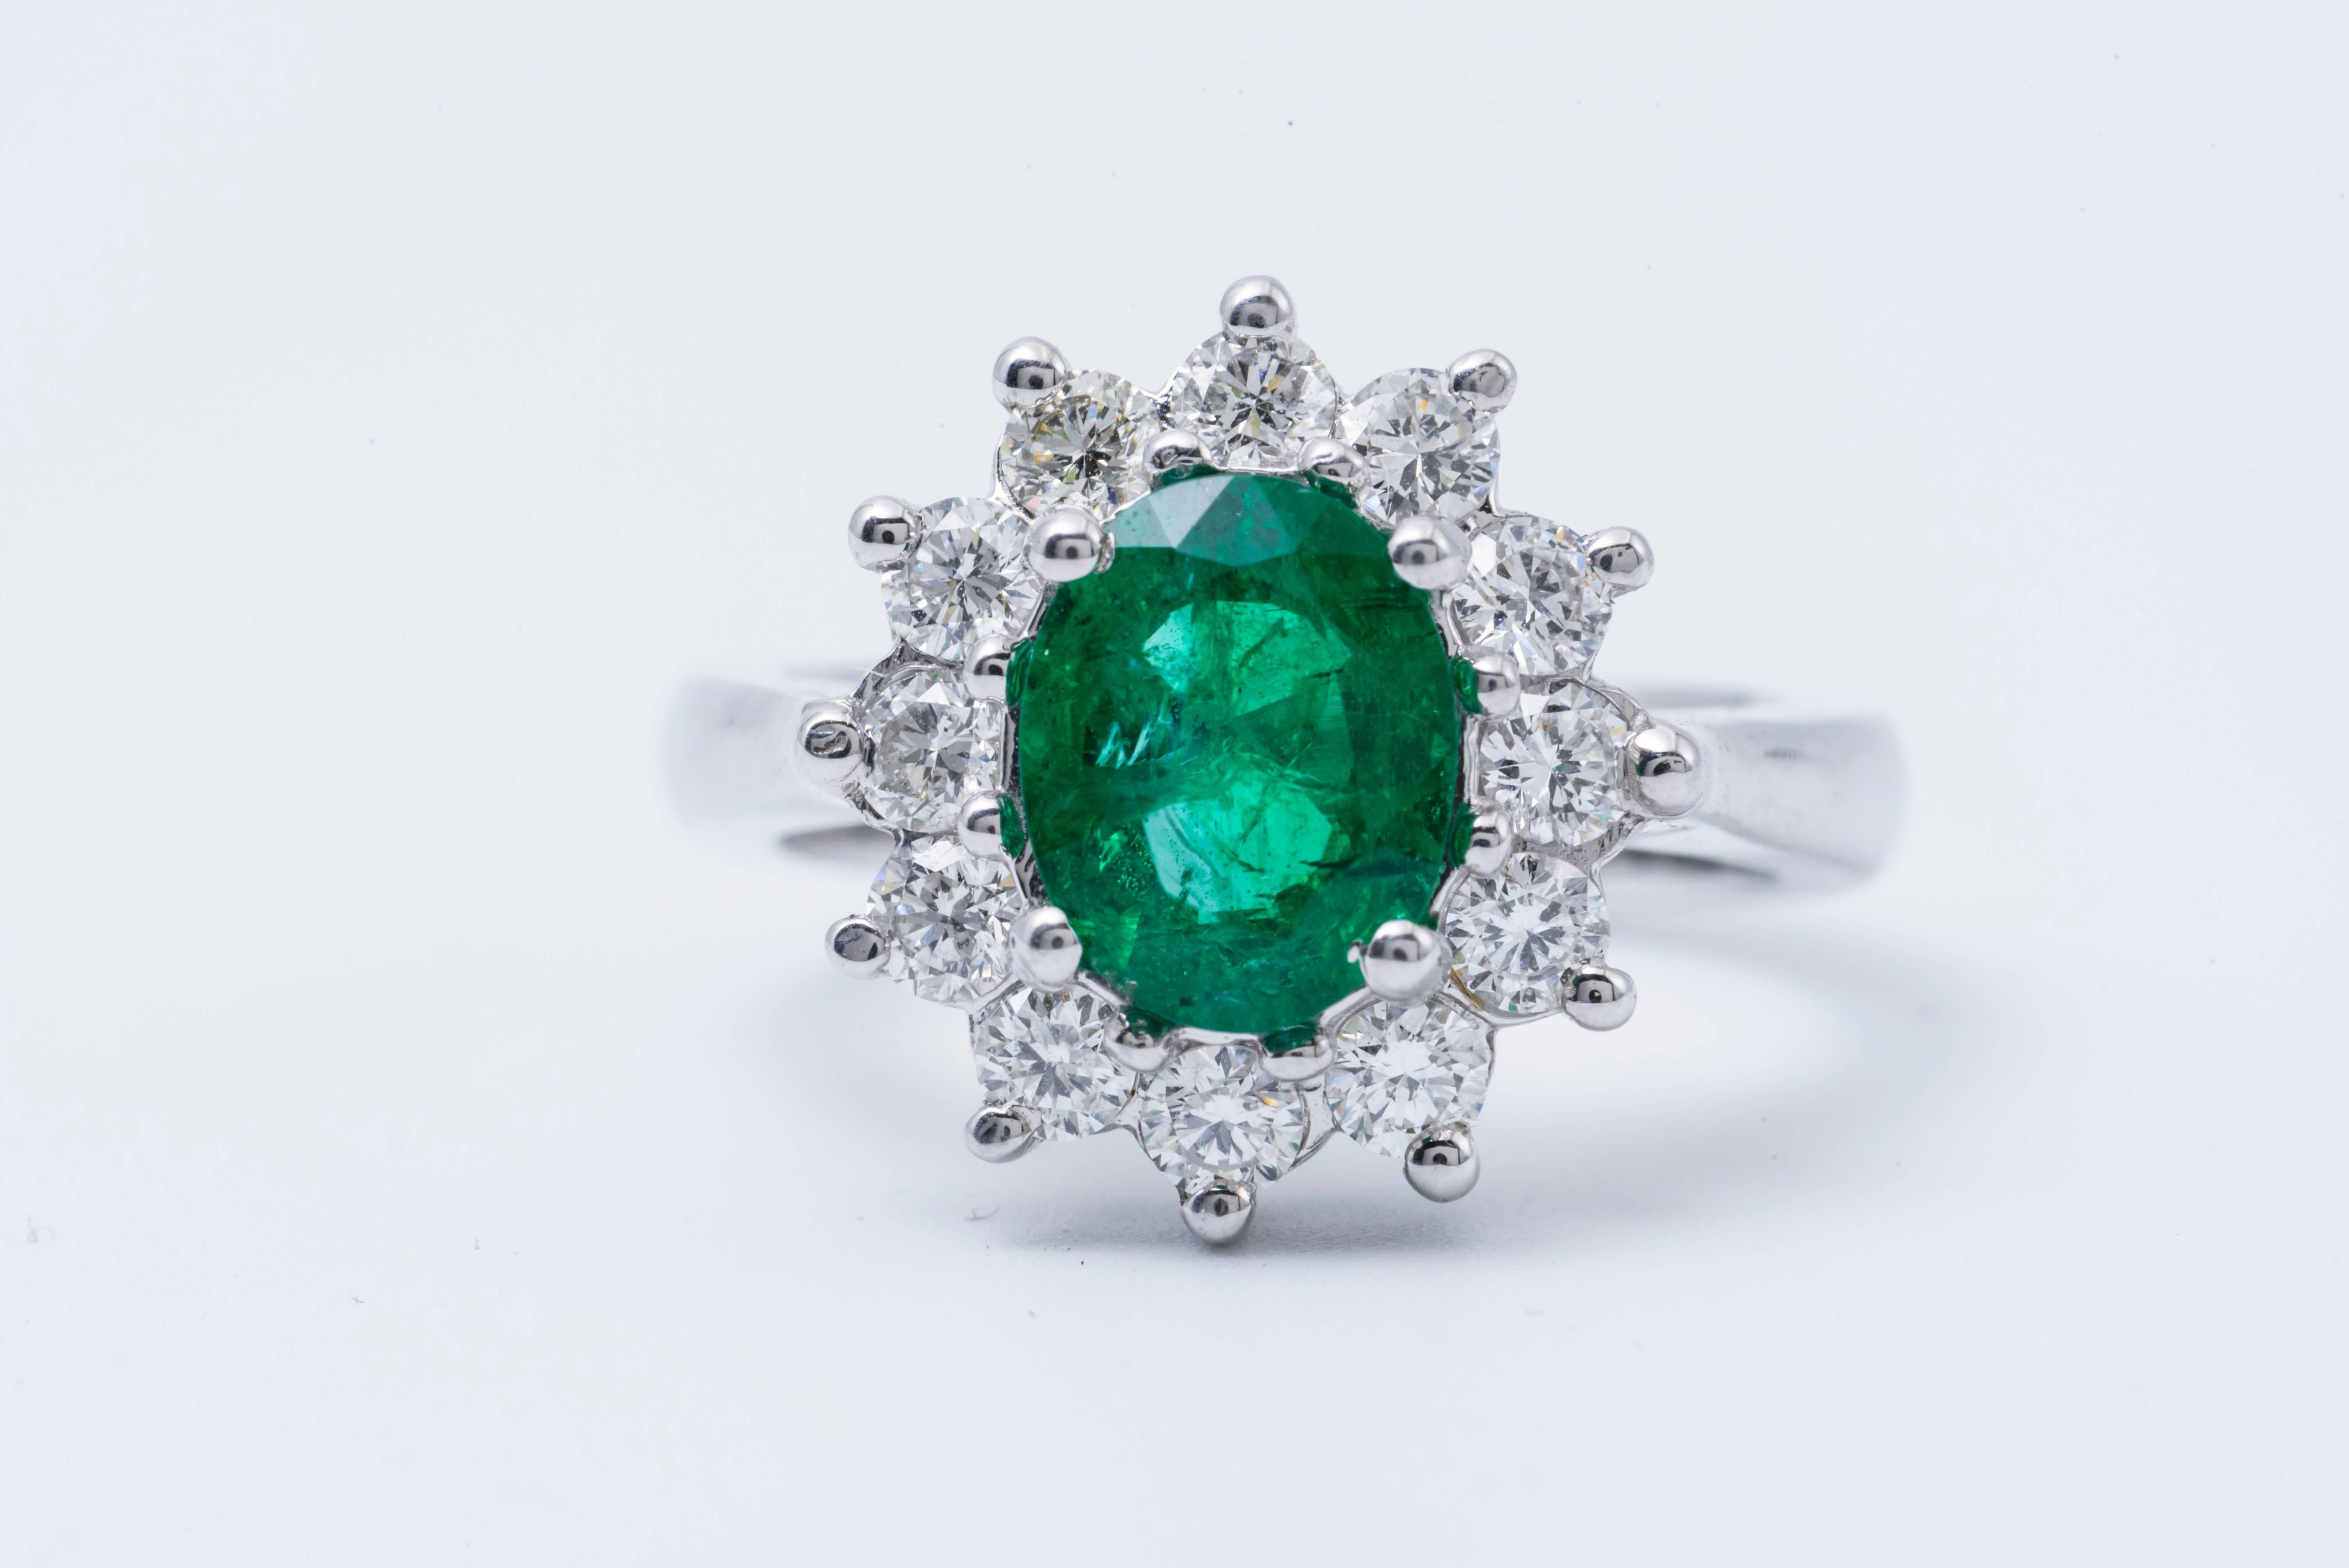 14 K white gold ring.
Emerald weight: 1.47 Carats  Size 9x7
Diamond Weight: 0.84 Cts.
its a classy timeless ring good for all your special occasions.All our Gemstones are genuine, and are sourced with the highest degree of integrity.
